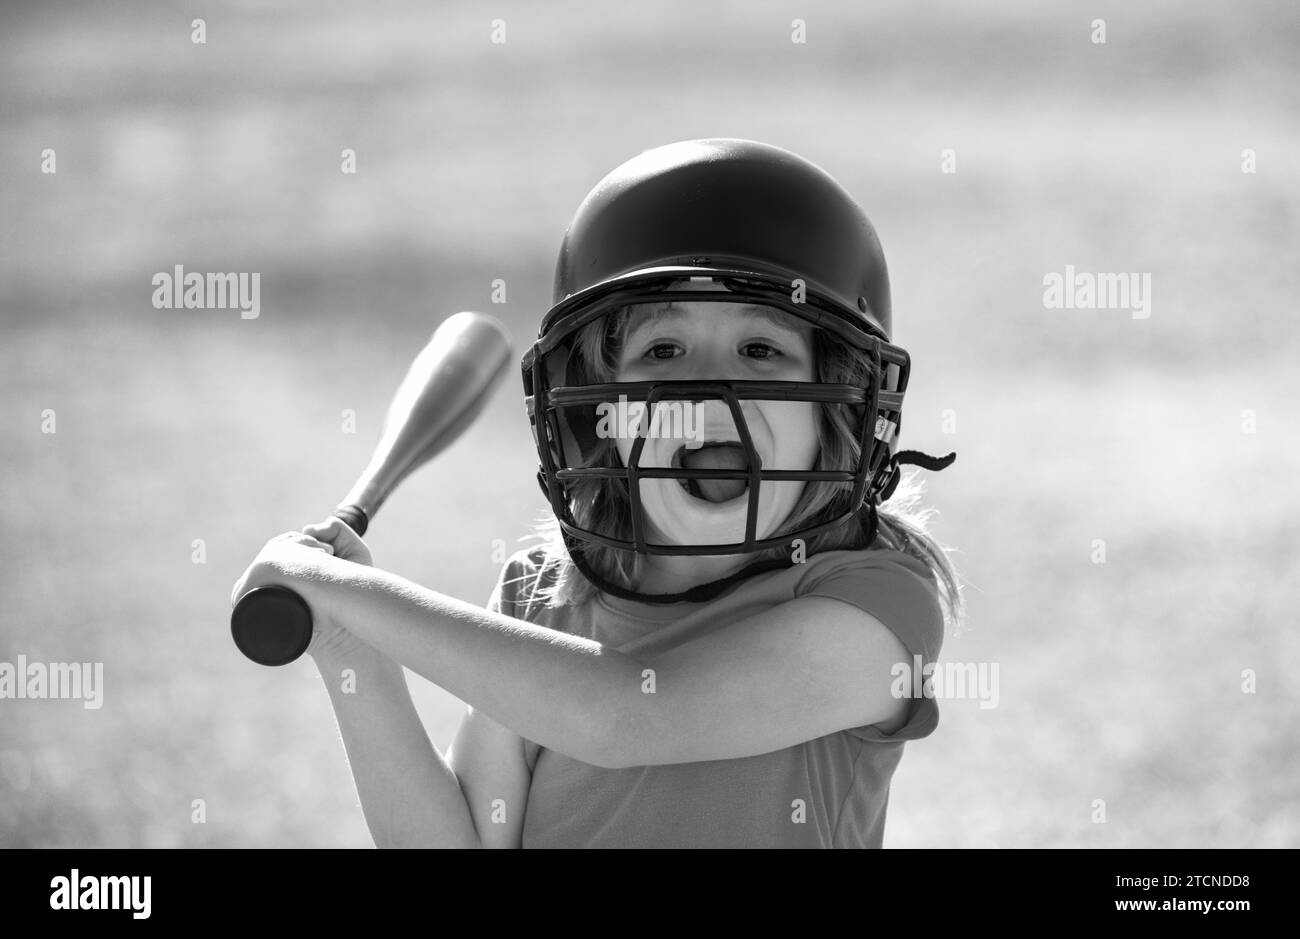 Portrait of excited amazed kid baseball player wearing helmet and hold baseball bat. Funny kids sports face. Stock Photo